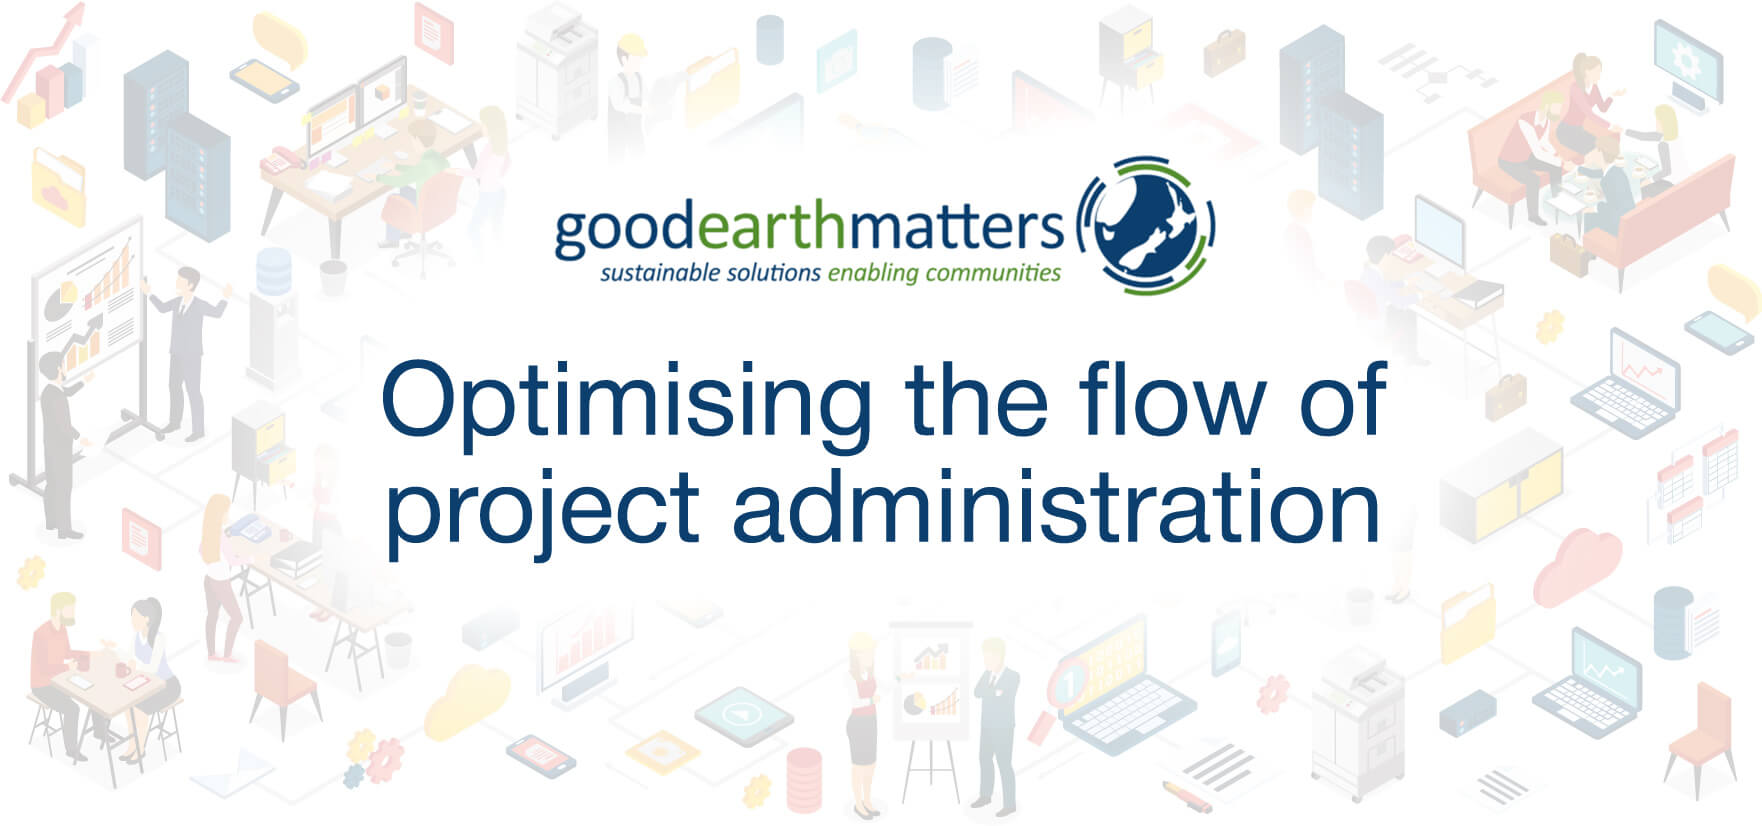 Good Earth Matters:  Optimising the flow of project administration